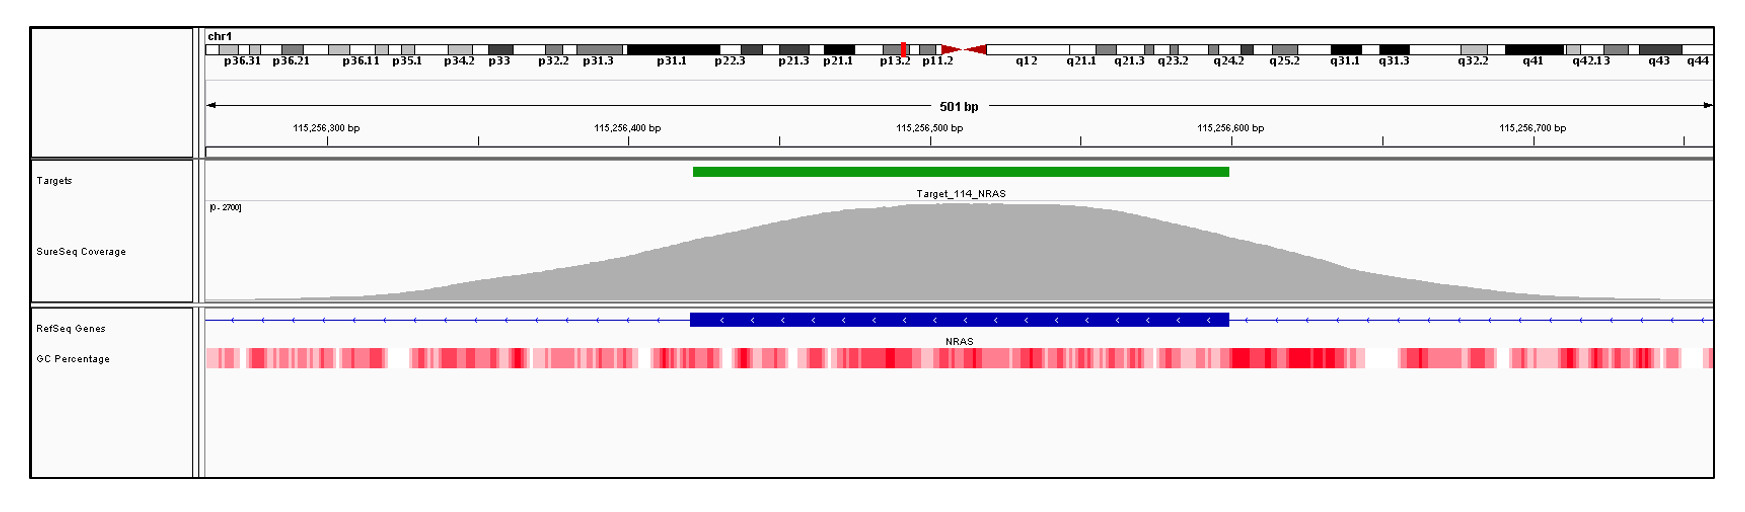 NRAS Exon 3 (hg19 chr1:115256421-115256599). Depth of coverage per base (grey). Targeted region (green). Gene coding region as defined by RefSeq (blue). GC percentage (red).  Image